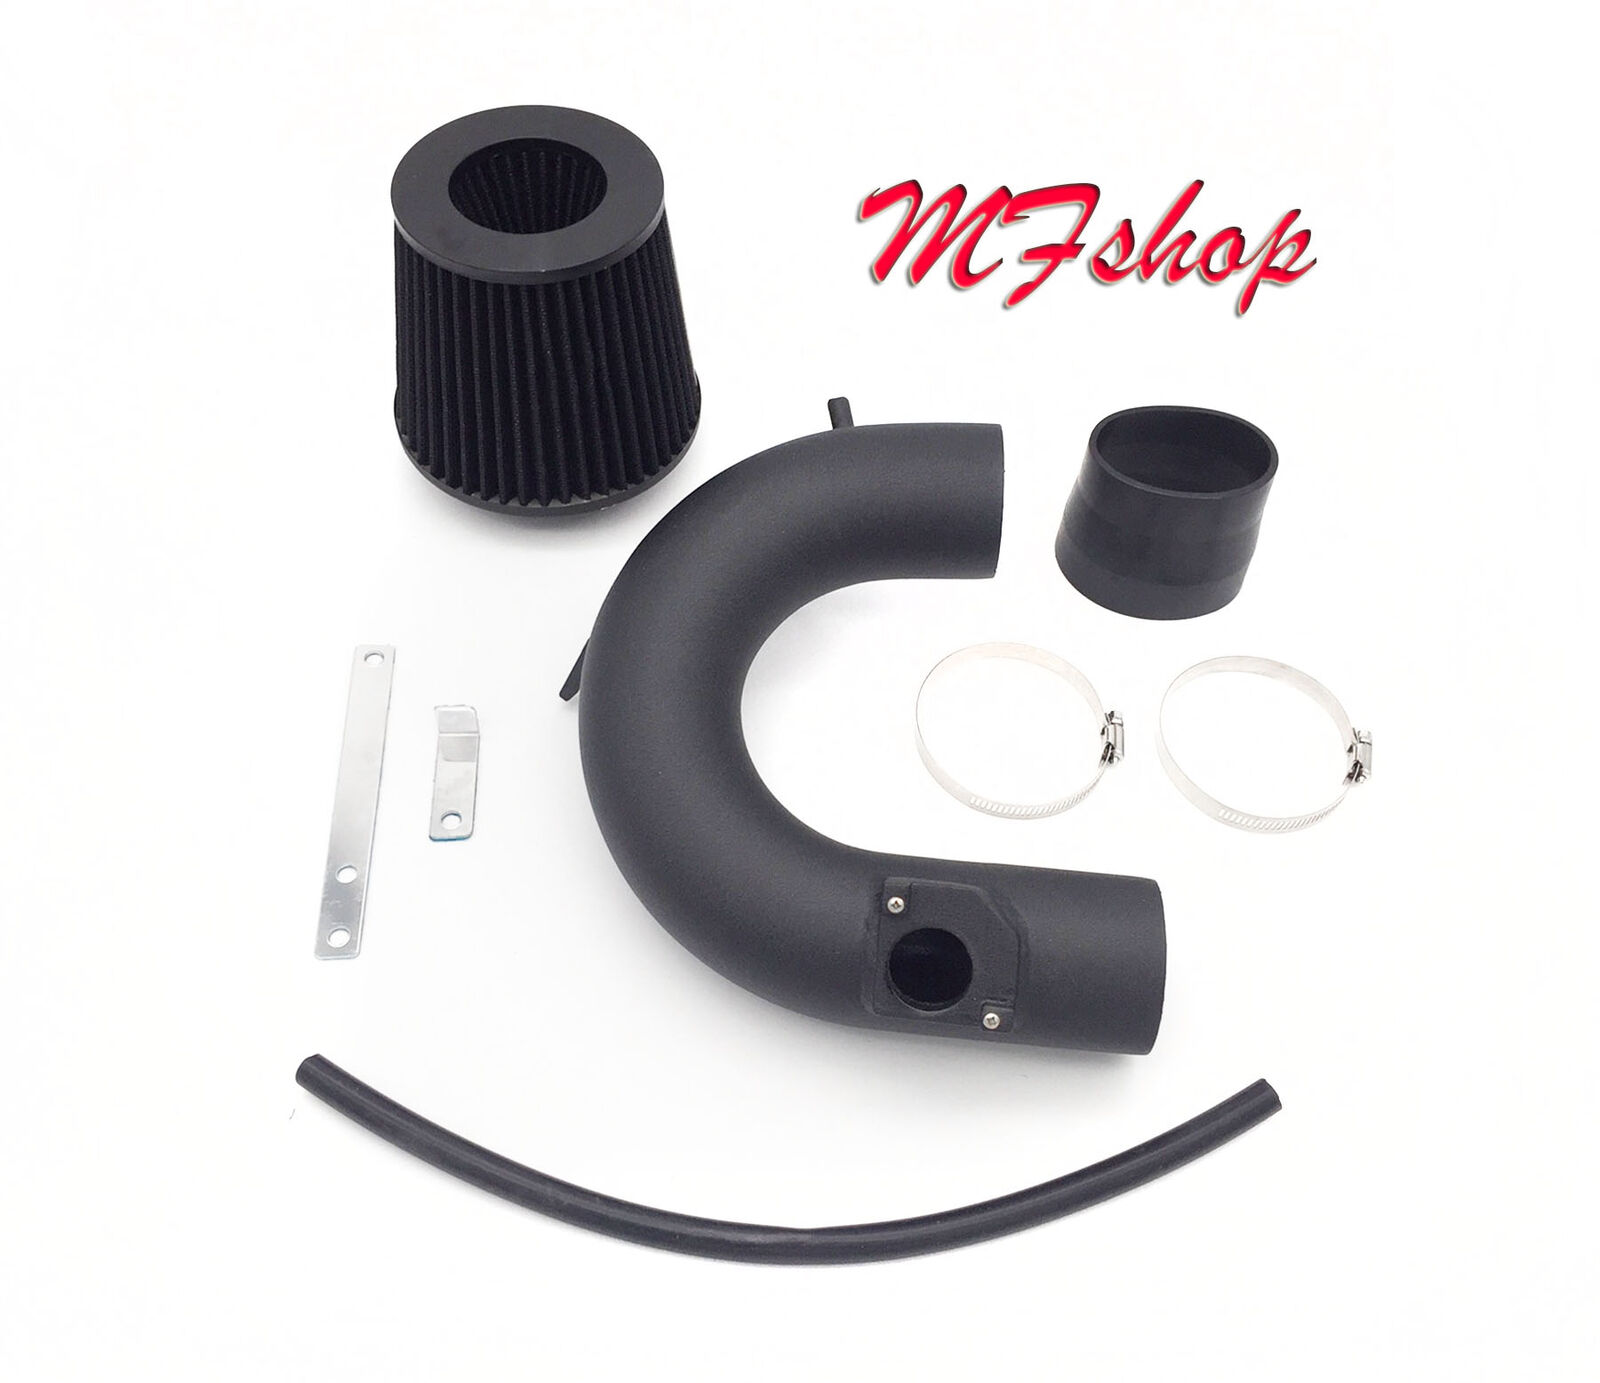 Coated Black For 2000-2005 Toyota Celica GTS 1.8L L4 Air Intake Kit Filter